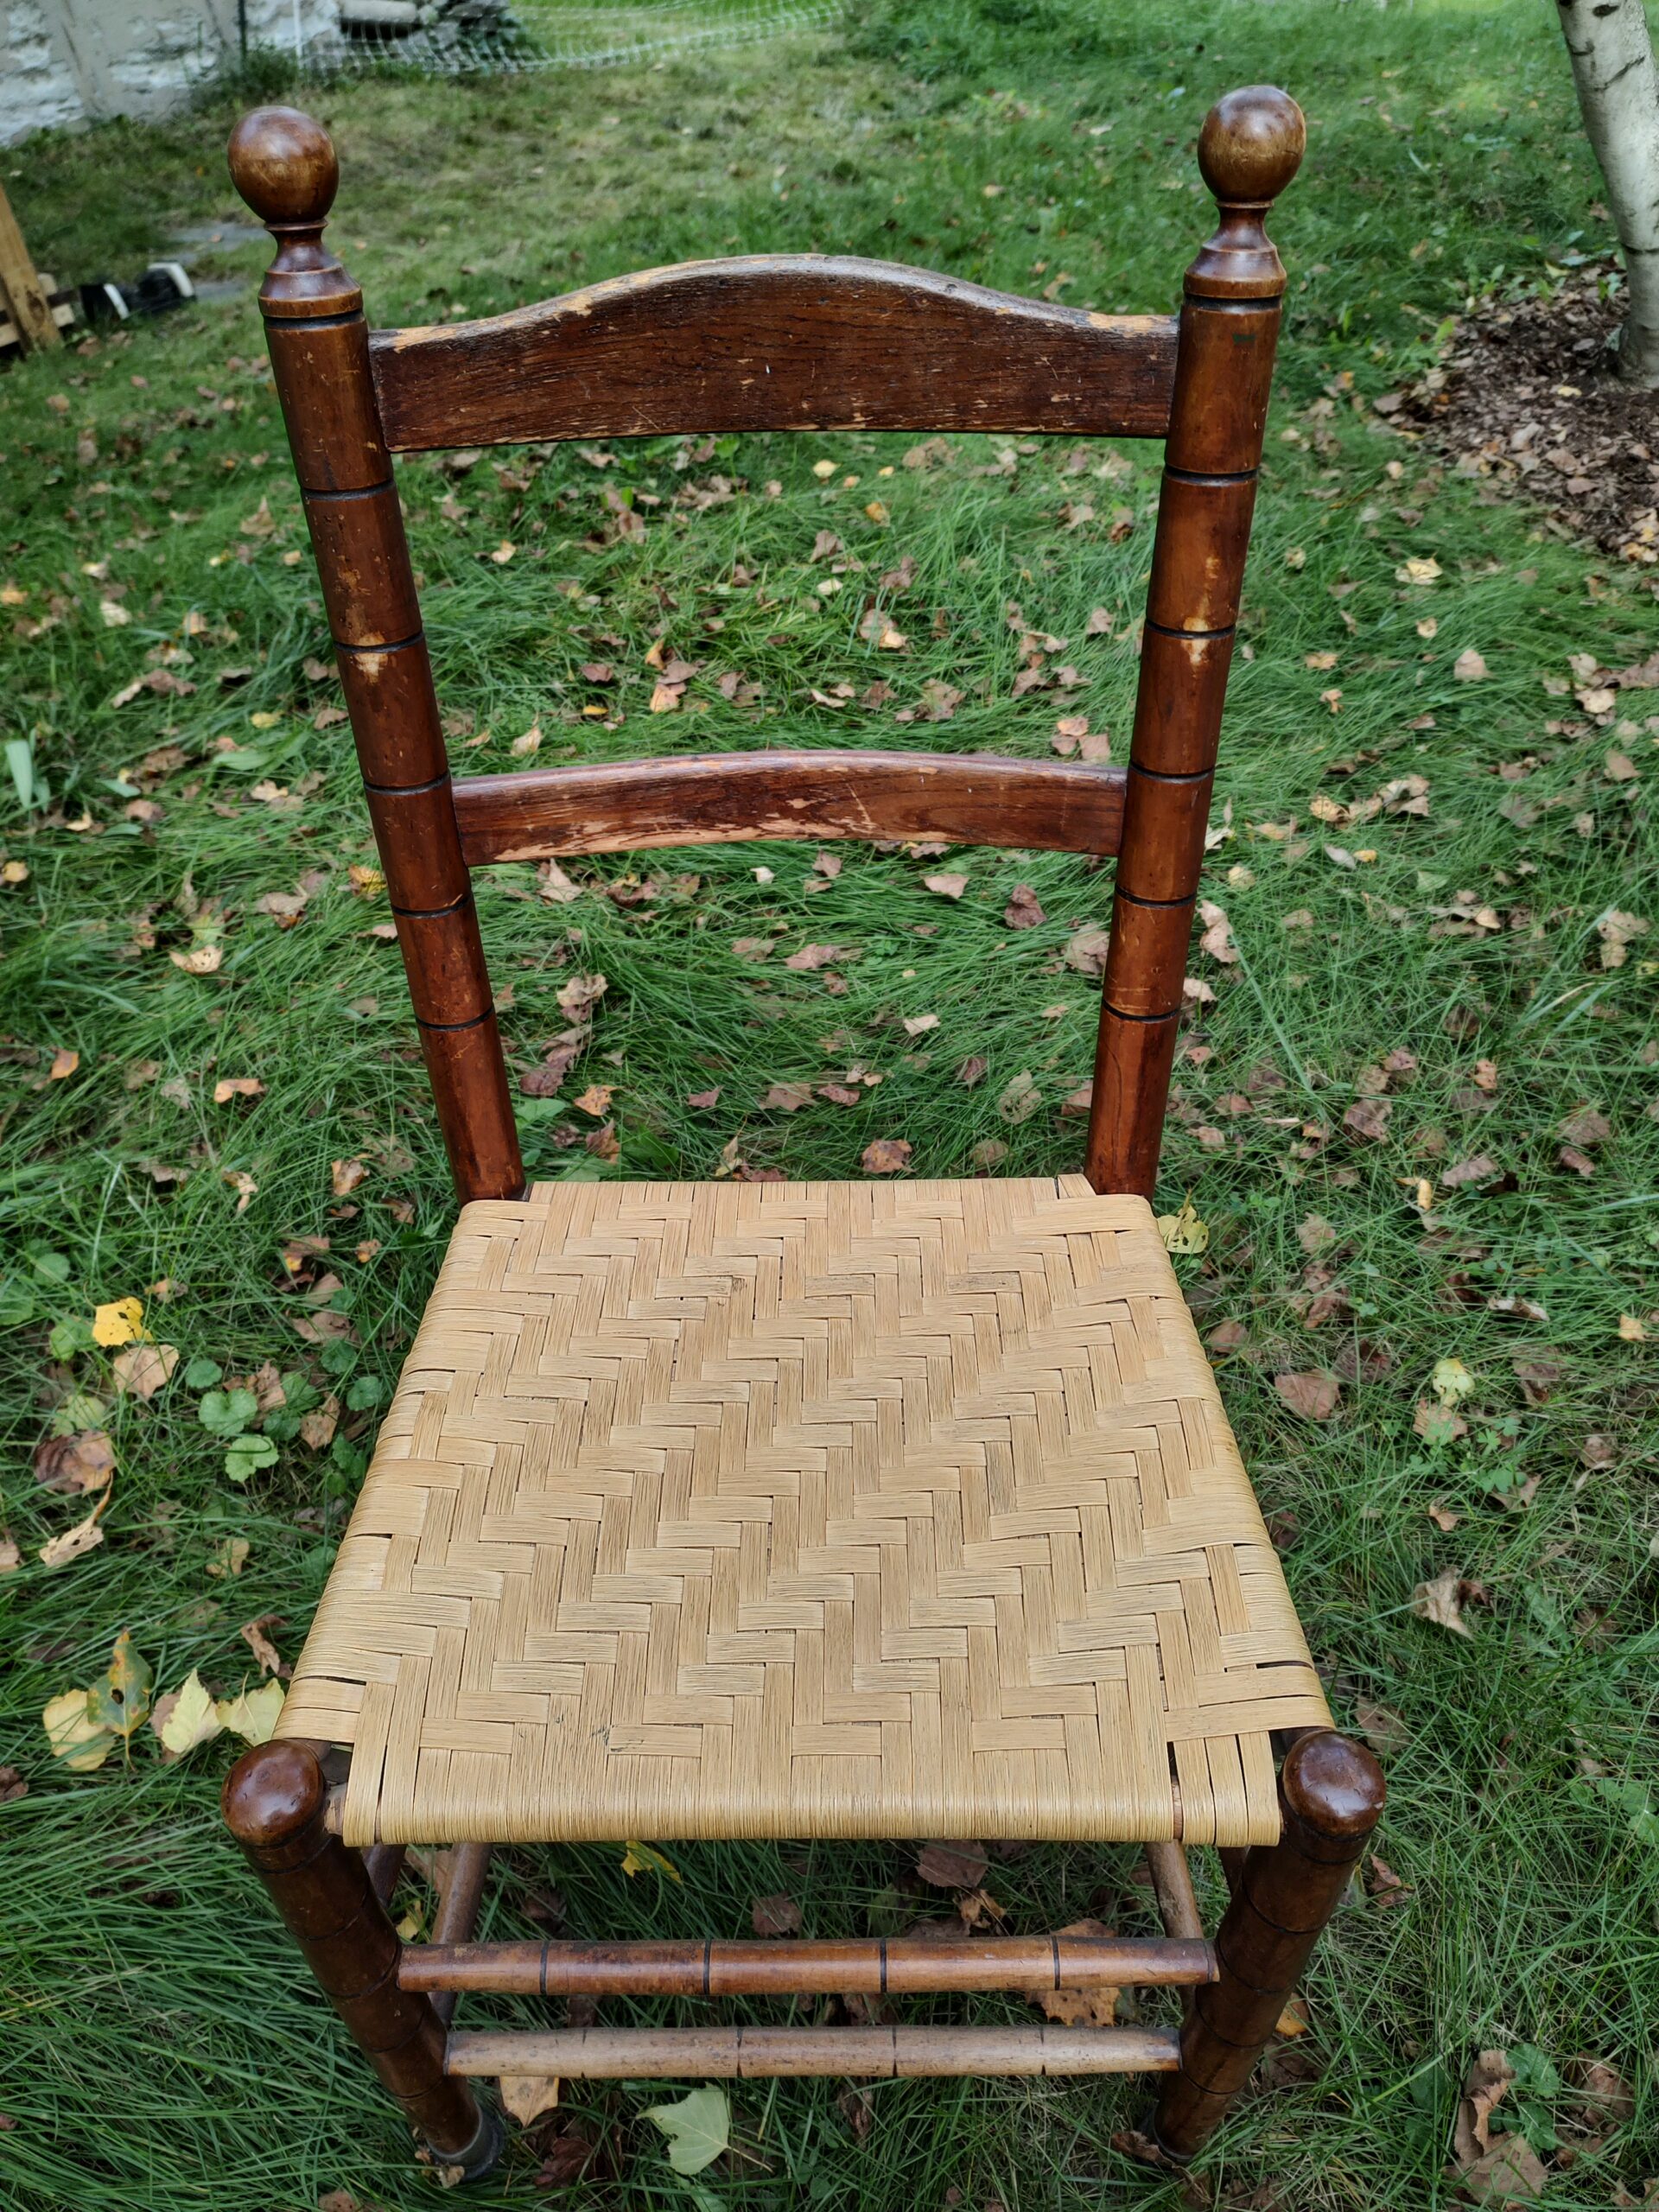 Traditional Woven Chair Seats